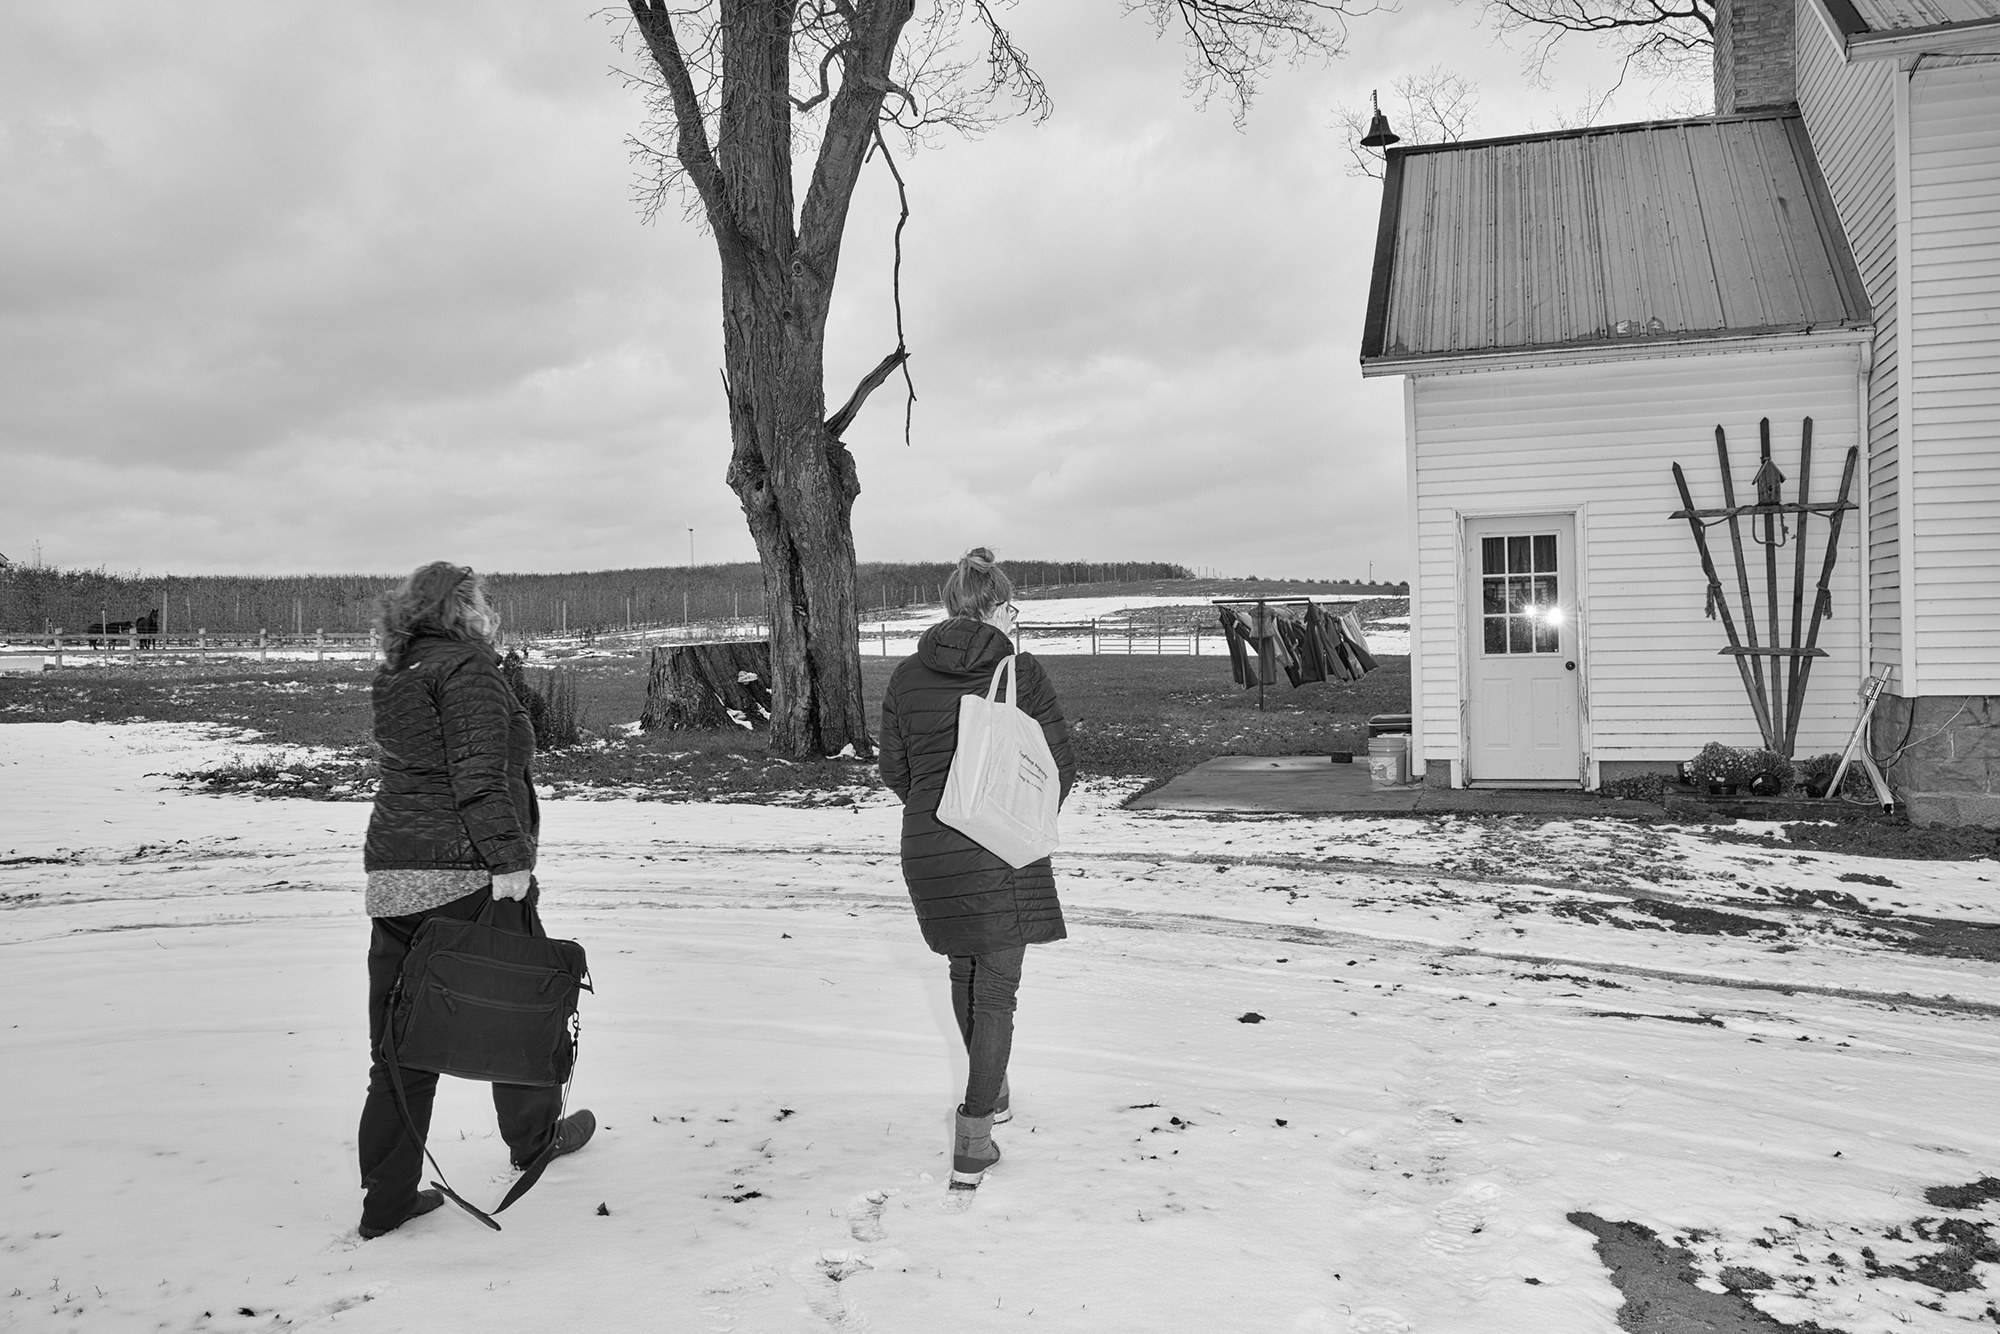 Two midwives walk into a house on a snowy plain